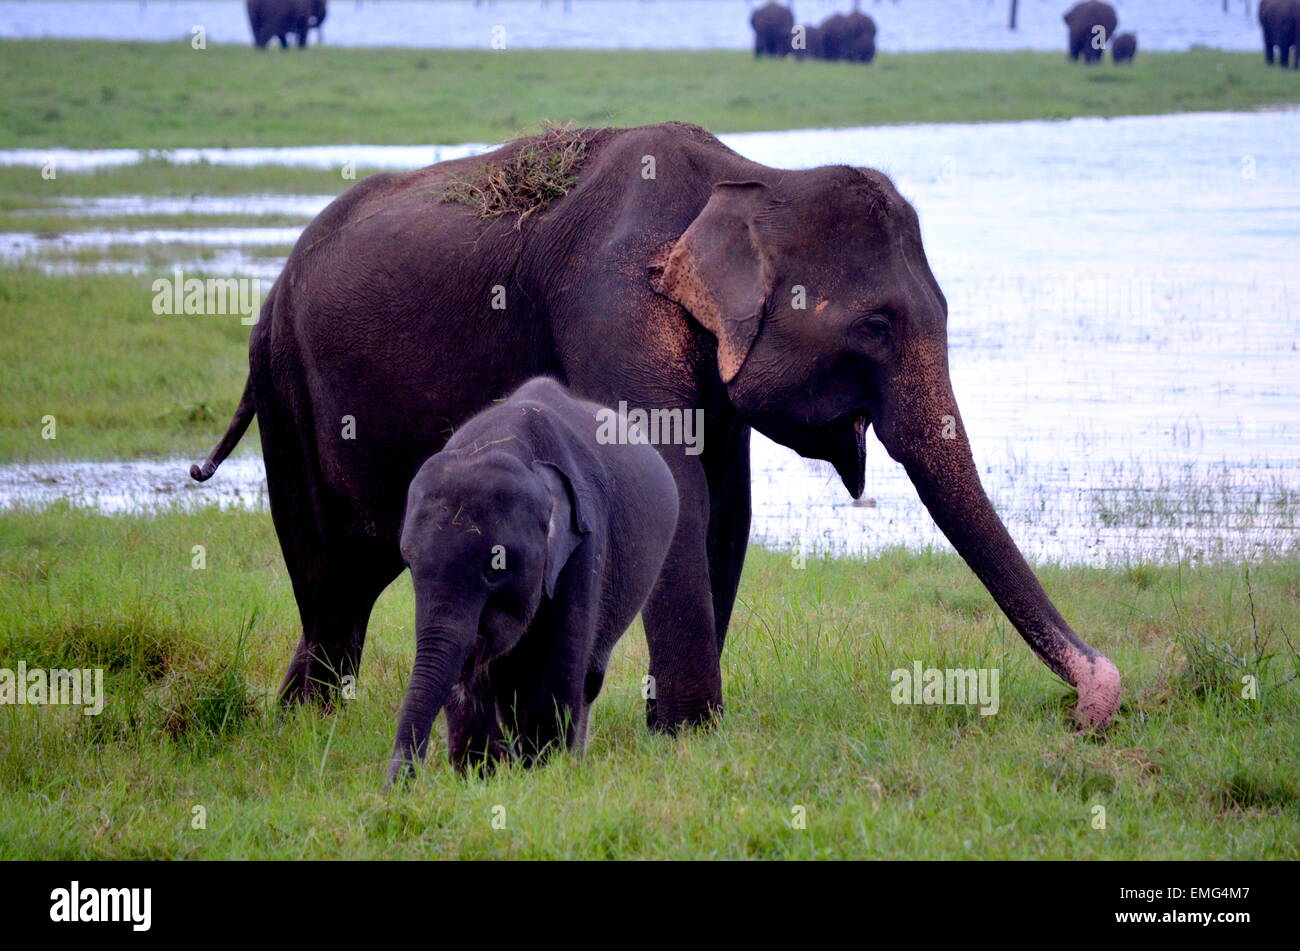 Mum elephant with her baby elephant In nature every mom is always near her little puppy to protect it Stock Photo